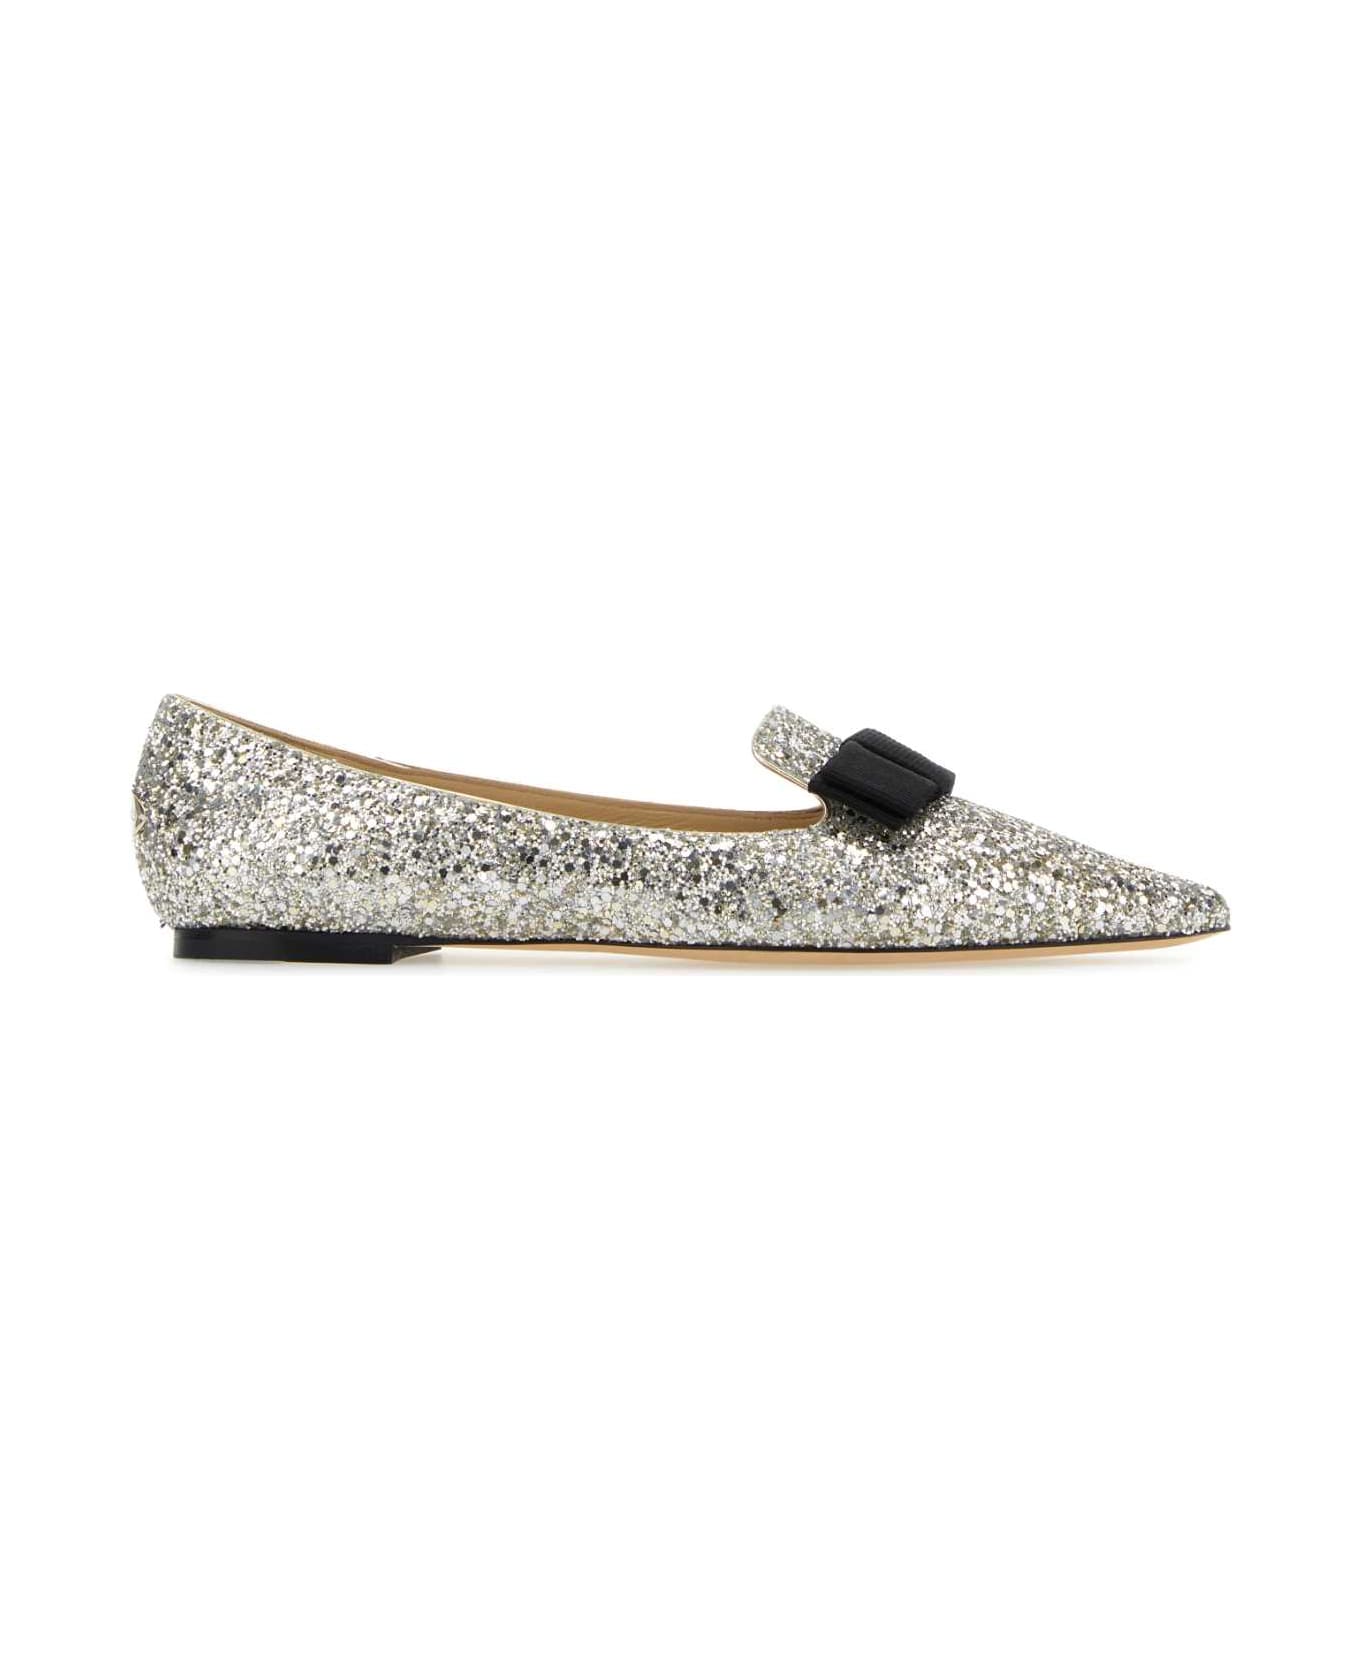 Jimmy Choo Embellished Fabric And Leather Gala Ballerinas - CHAMPAGNE フラットシューズ